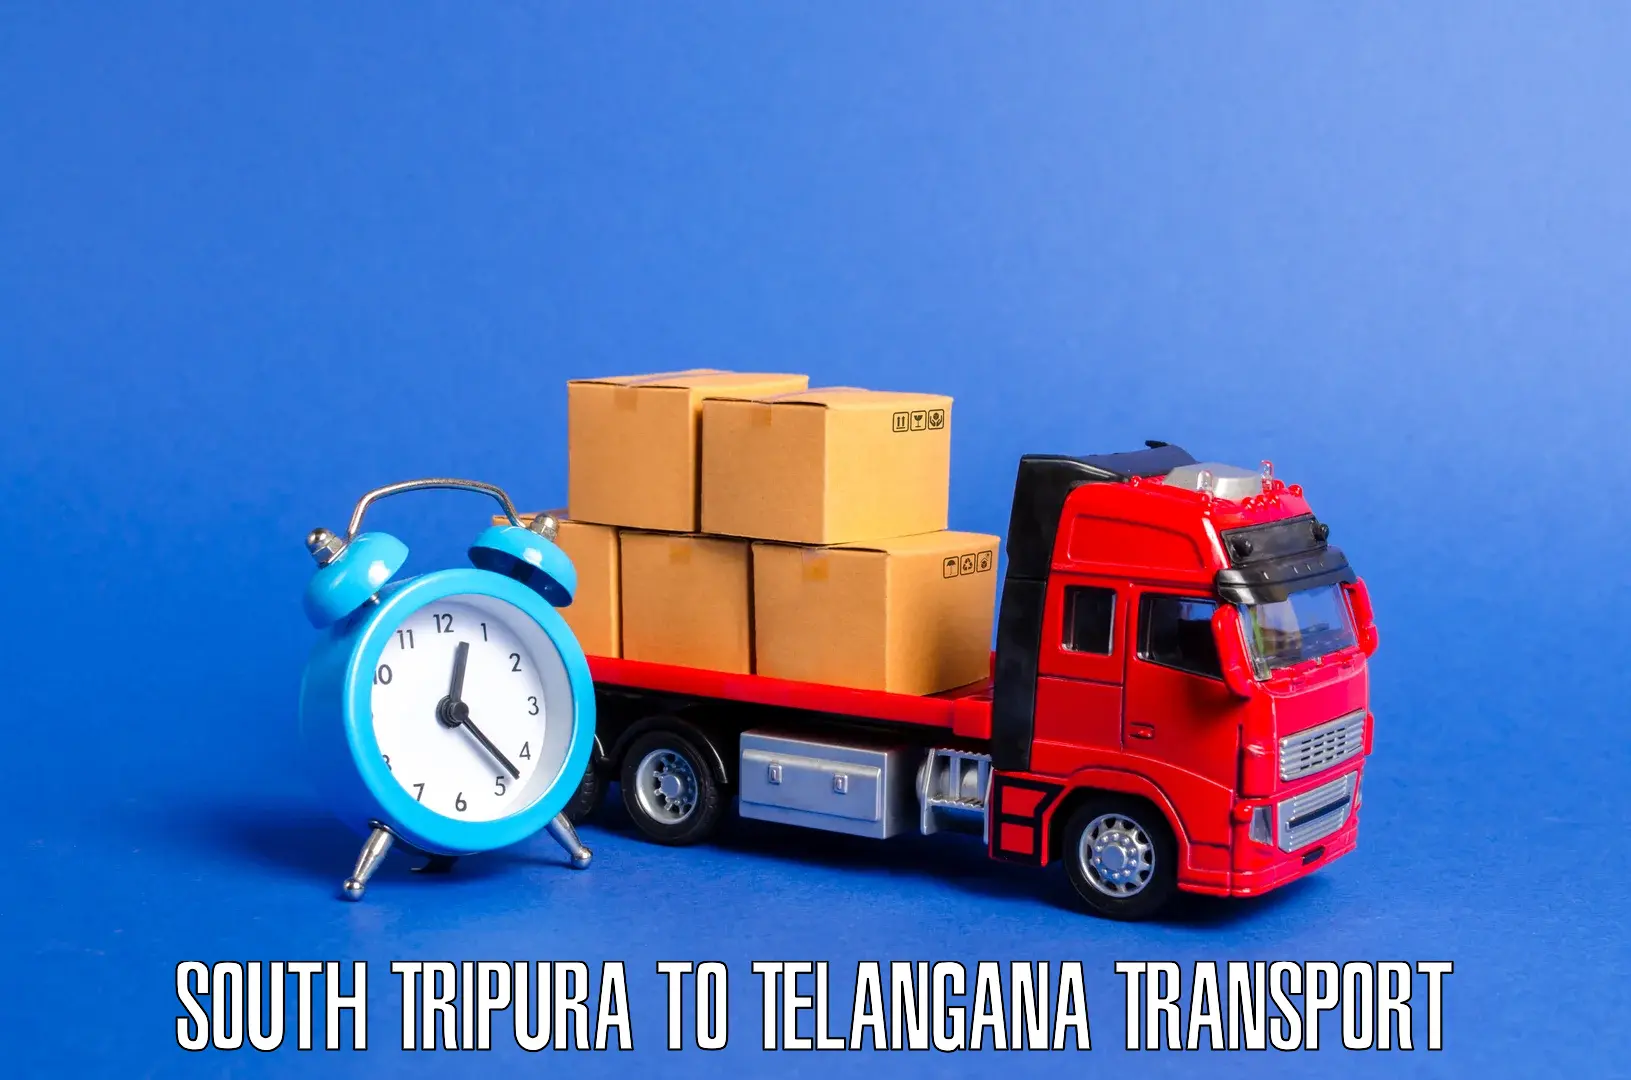 Transport shared services South Tripura to Siddipet